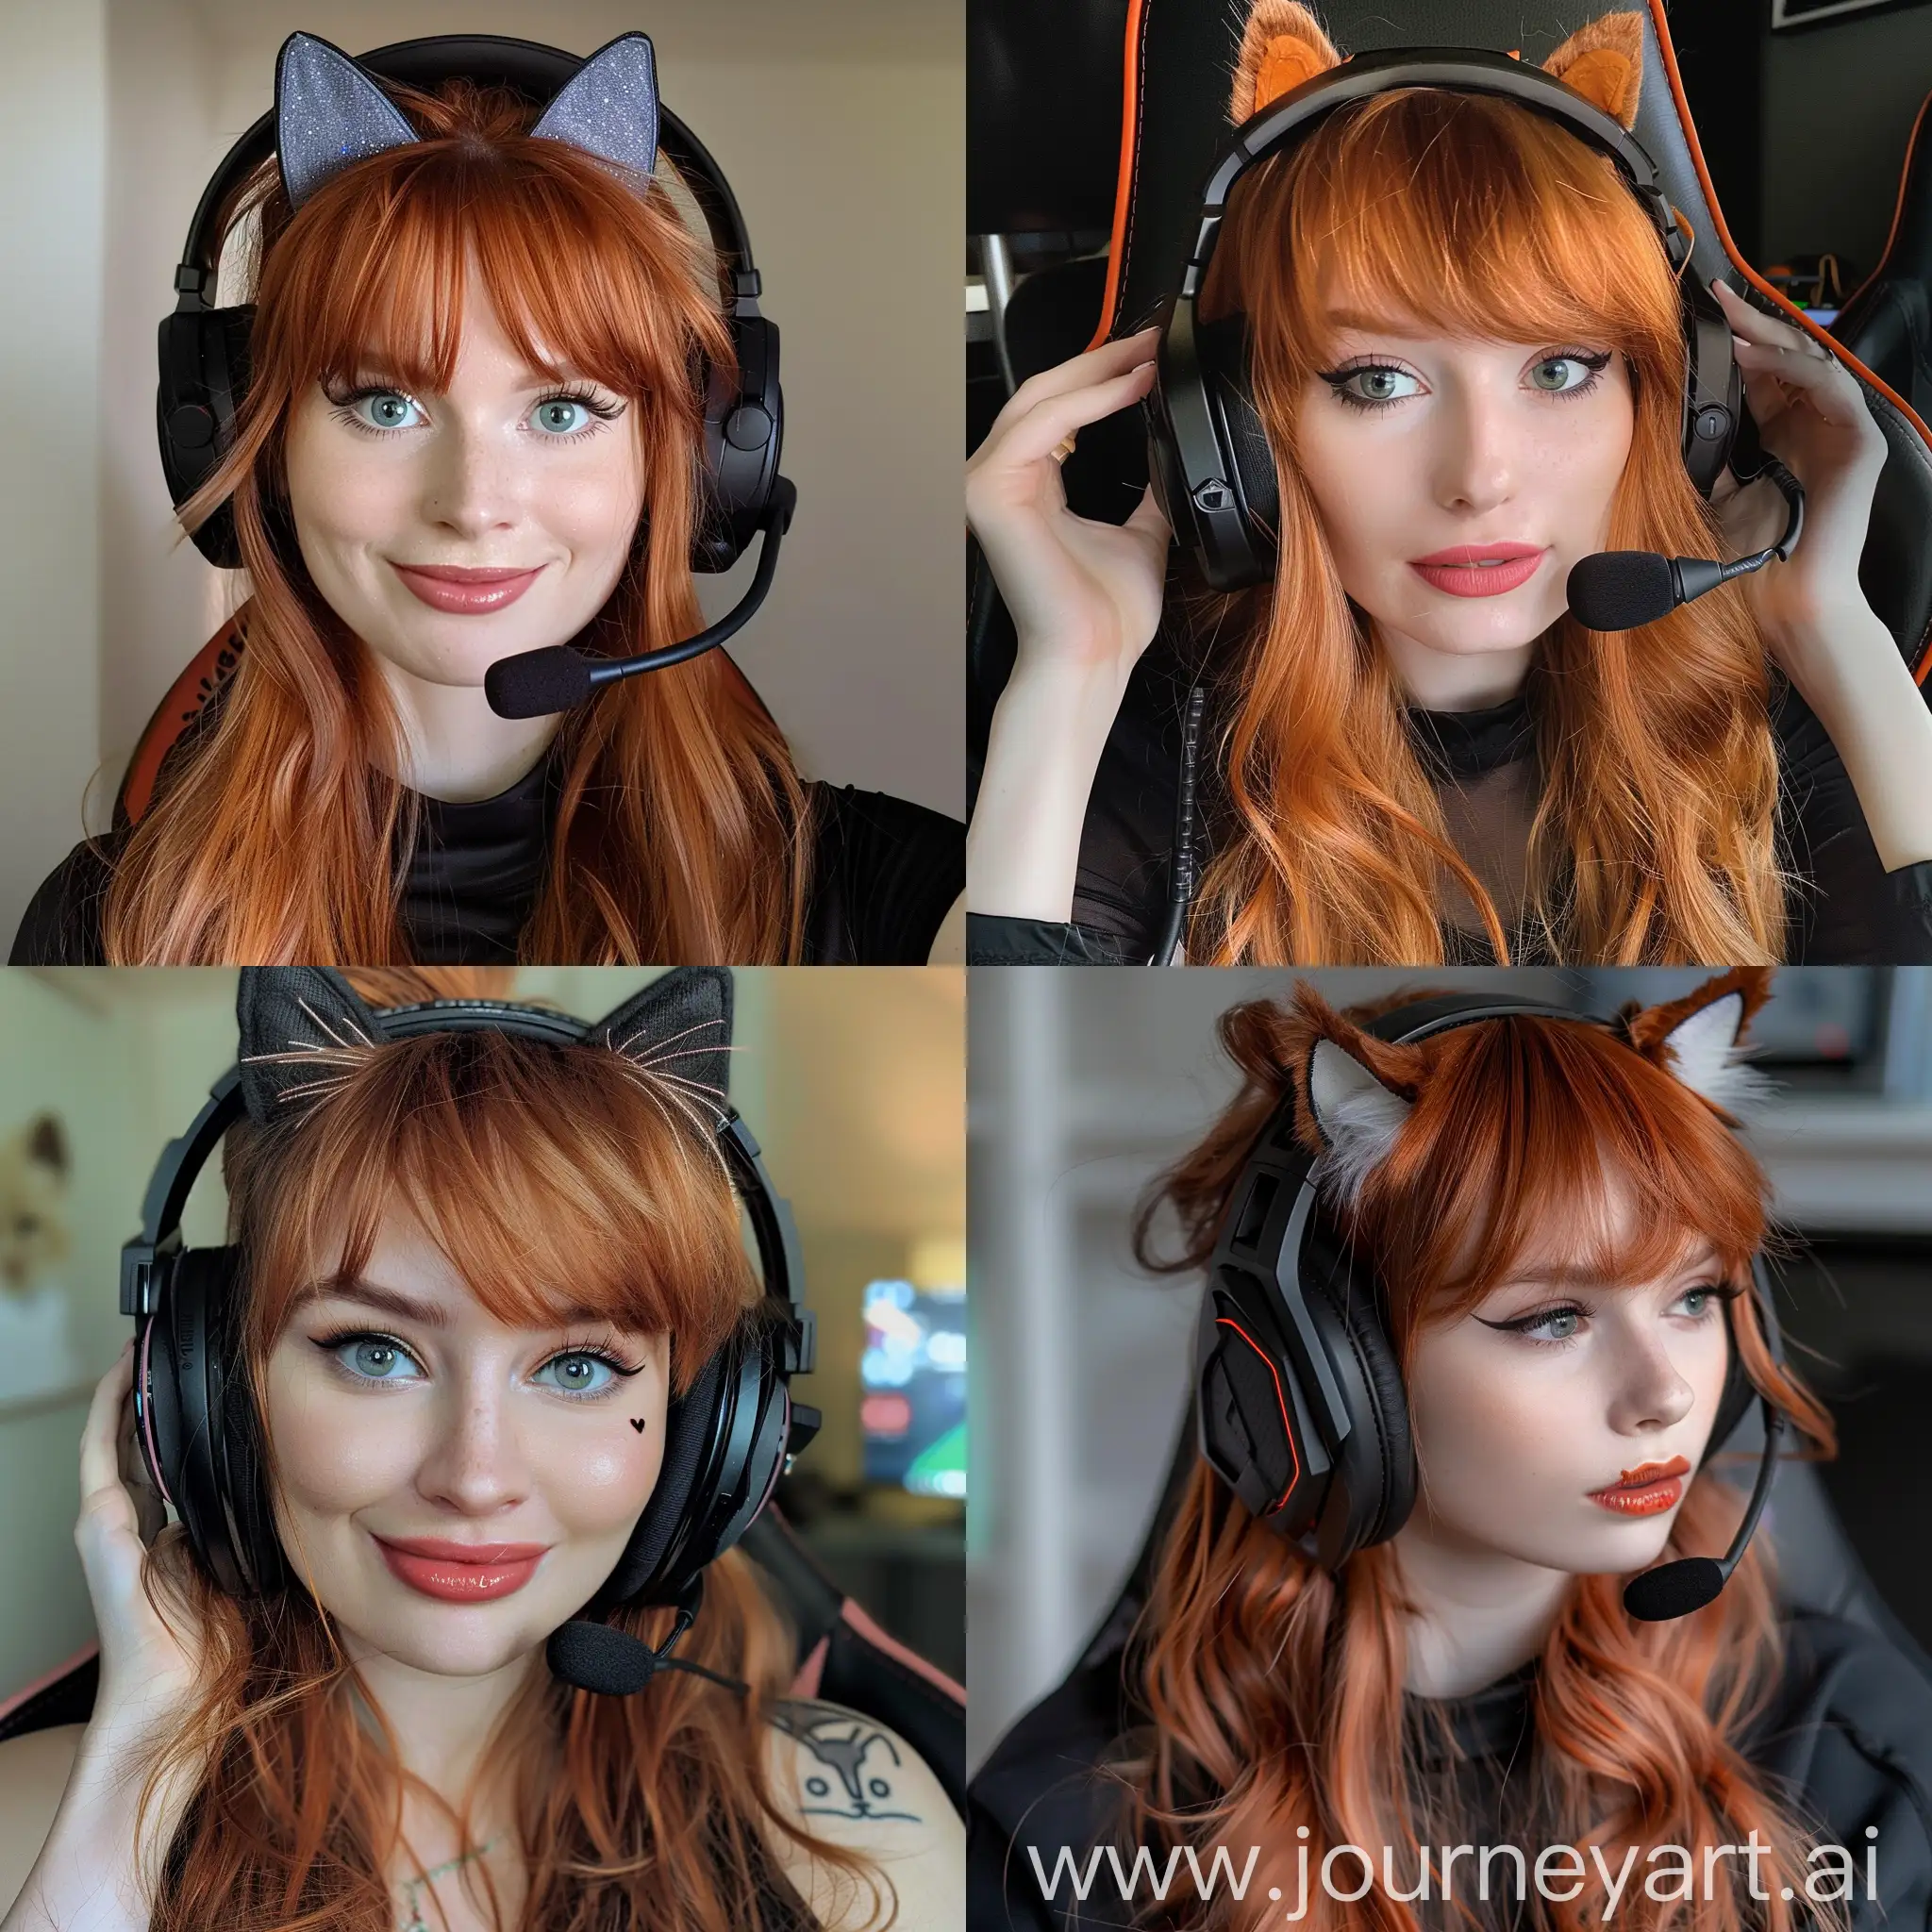 Adorable-Redhead-Streamer-Gaming-with-Cat-Ear-Gaming-Headset